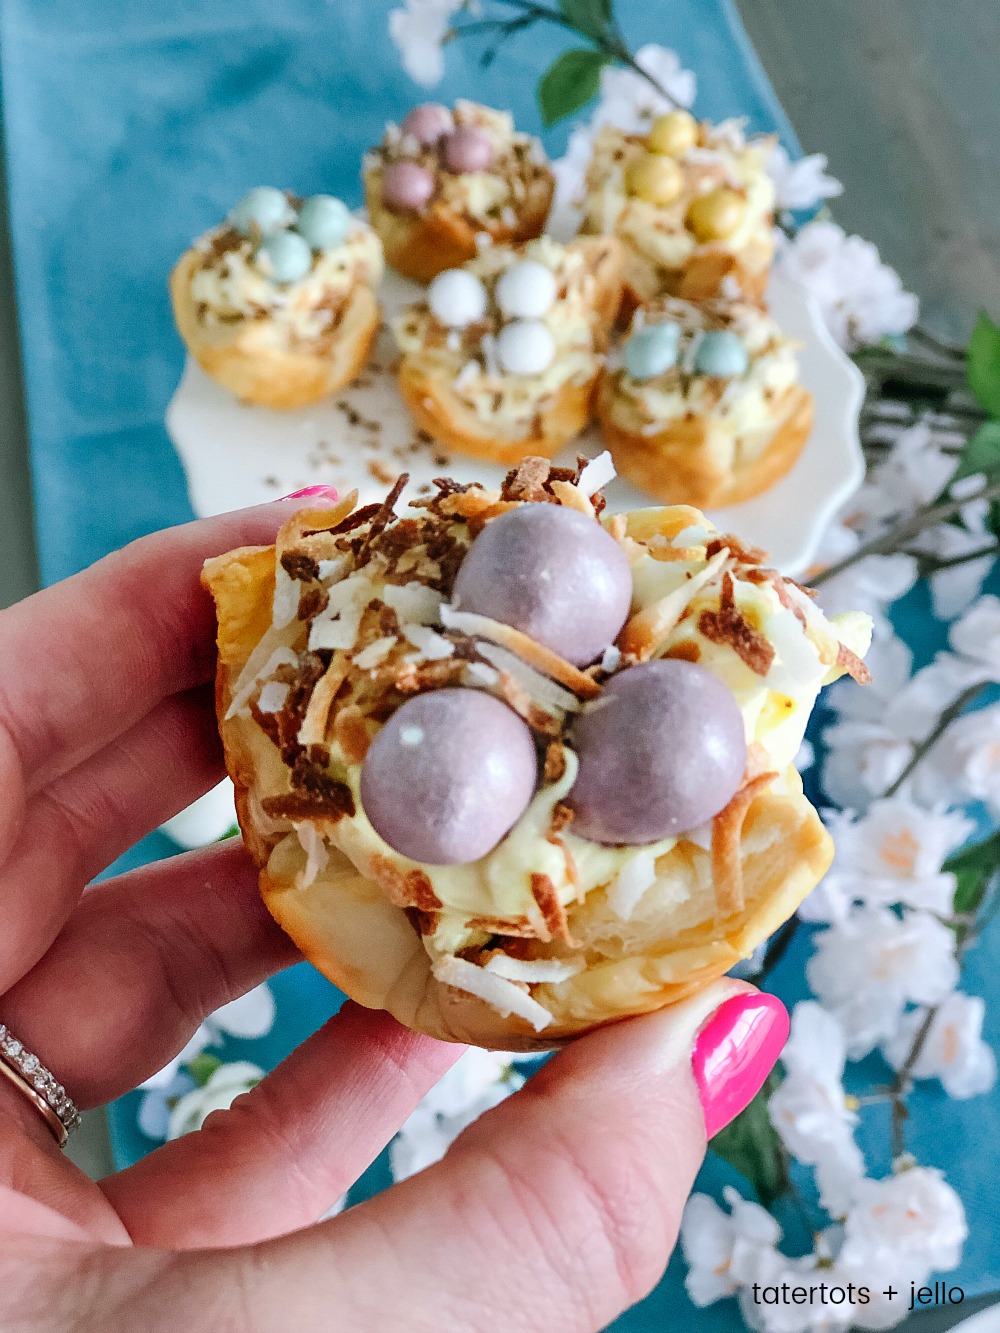 Robin Nests with Whipped Cream Filling - the perfect Spring and Easter treat! Flaky layers of baked puff pastry dough cups cradle creamy, whipped filling topped by toasted coconut and rich chocolate eggs. Bake up a beautiful dessert for Spring and Easter in just minutes! 